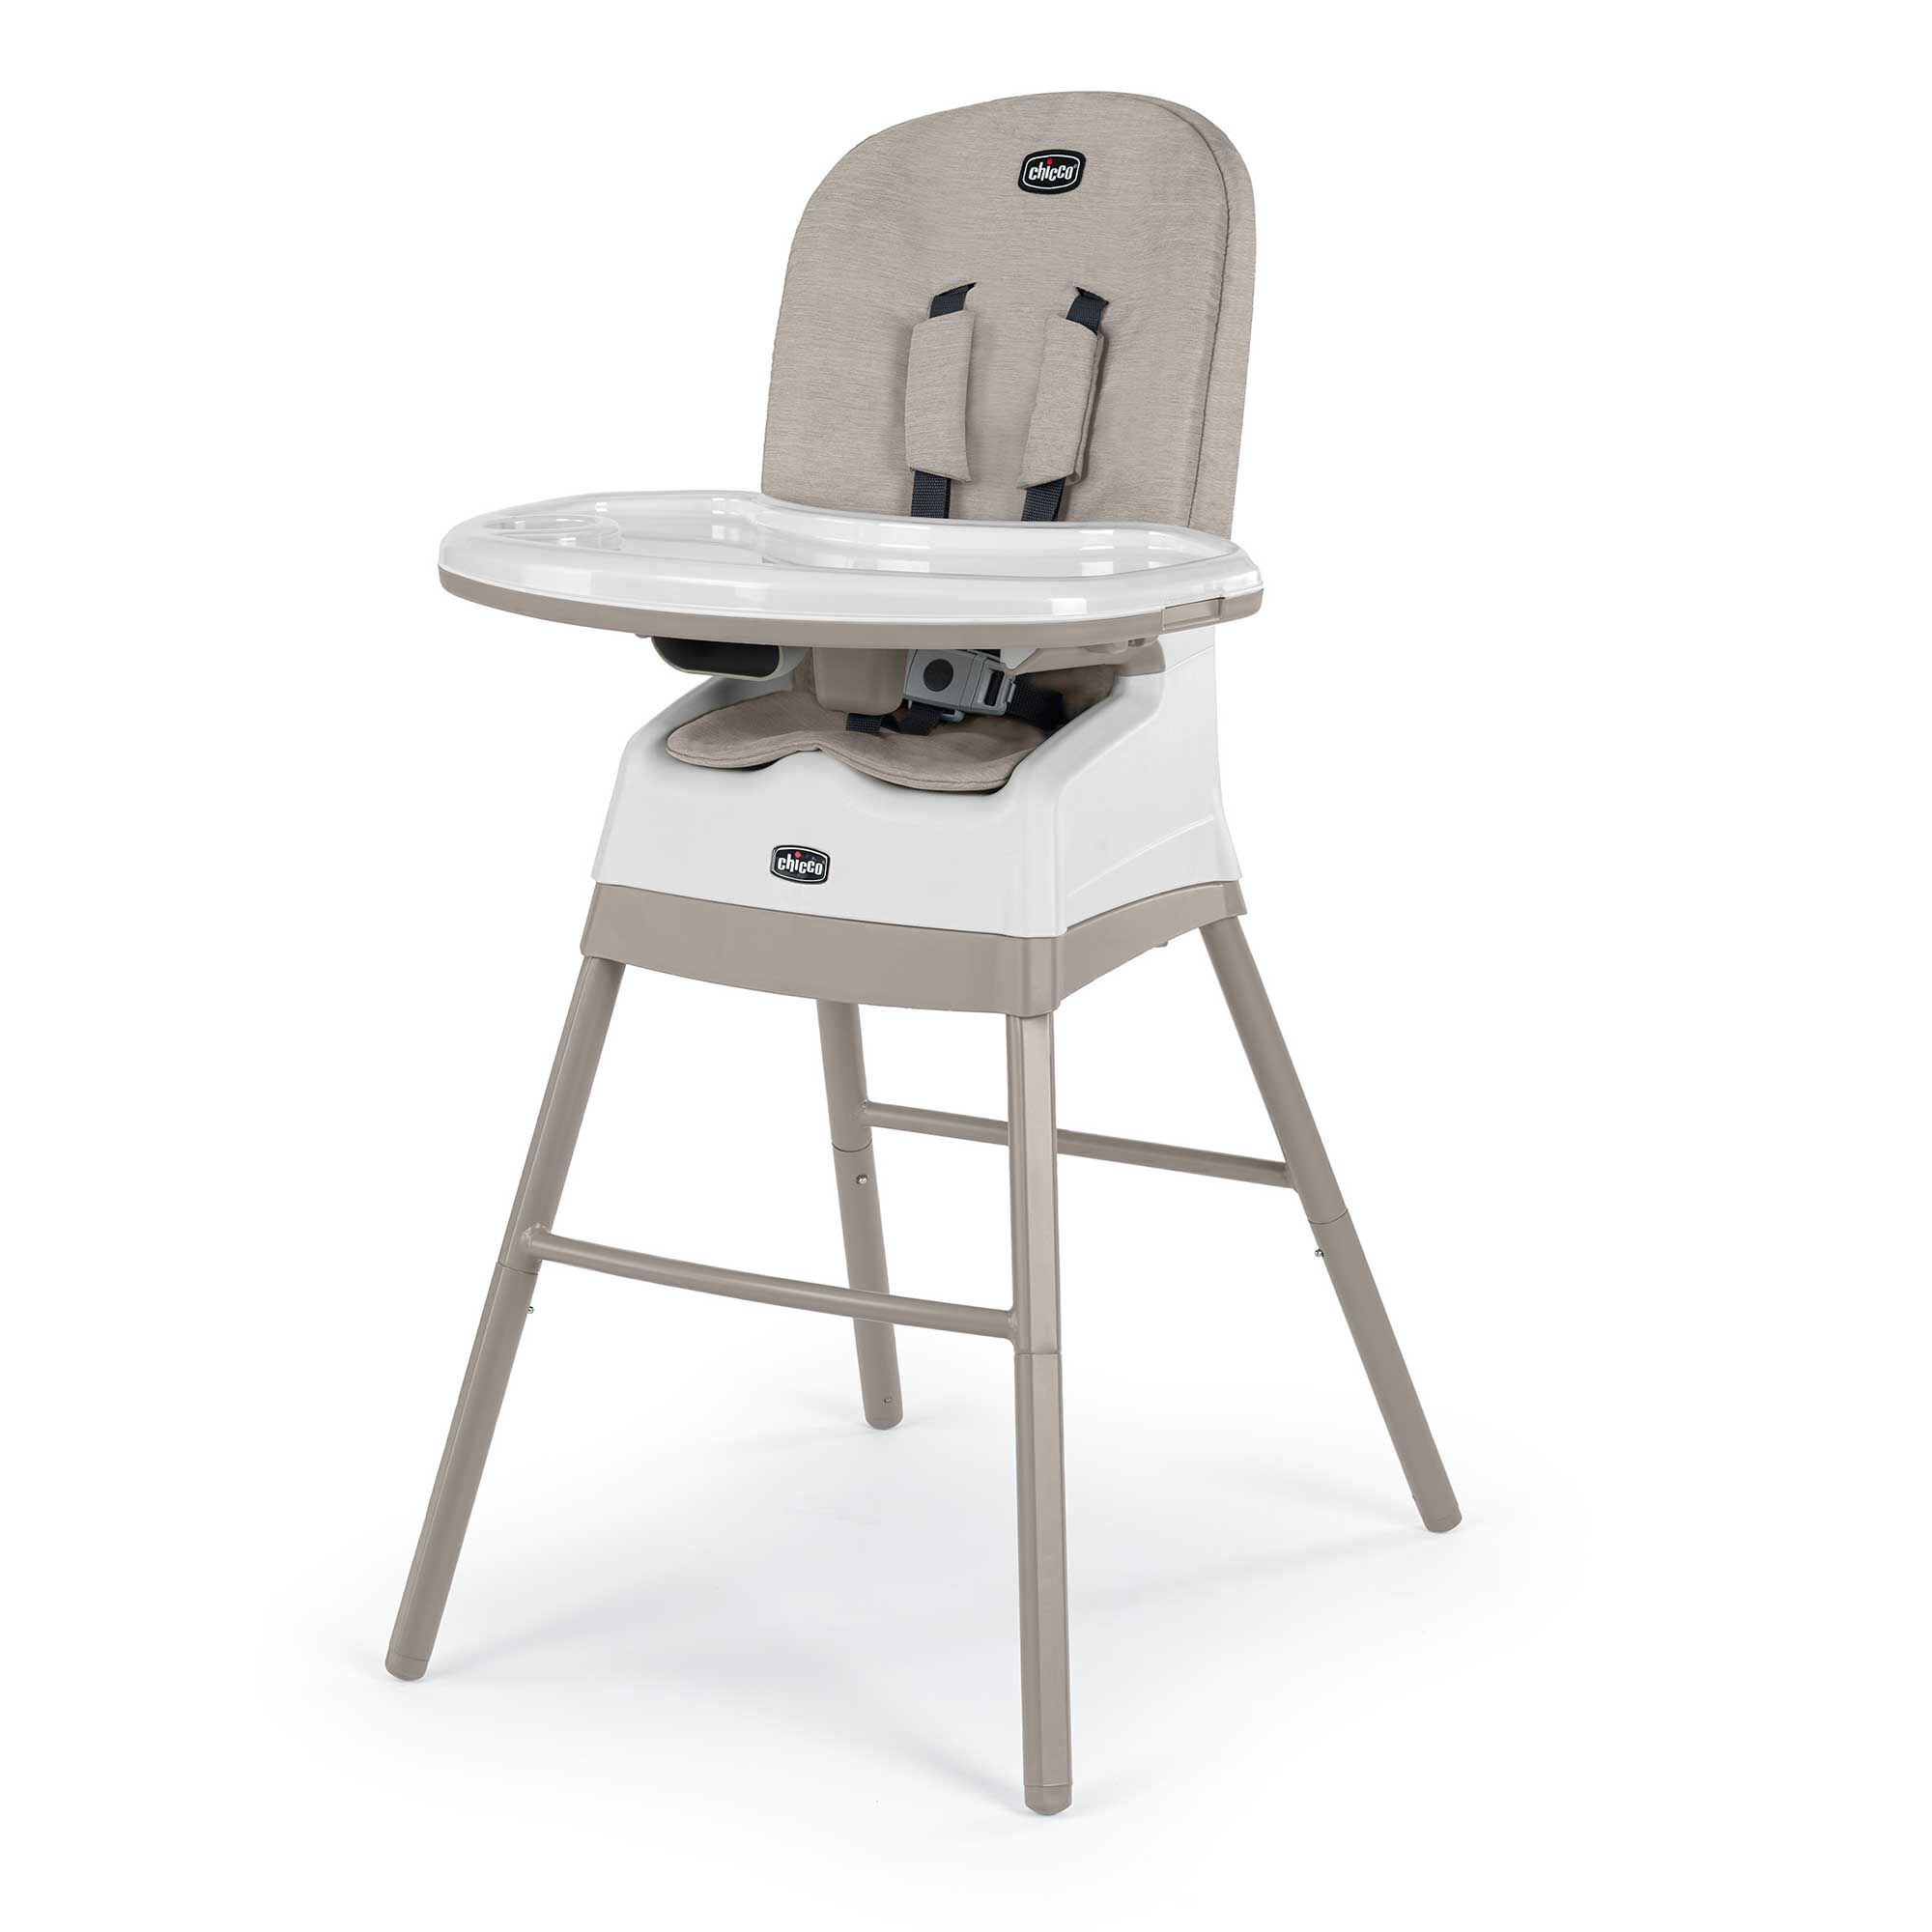 PORTAL Lightweight Backrest Stool Compact Folding Chair Seat with